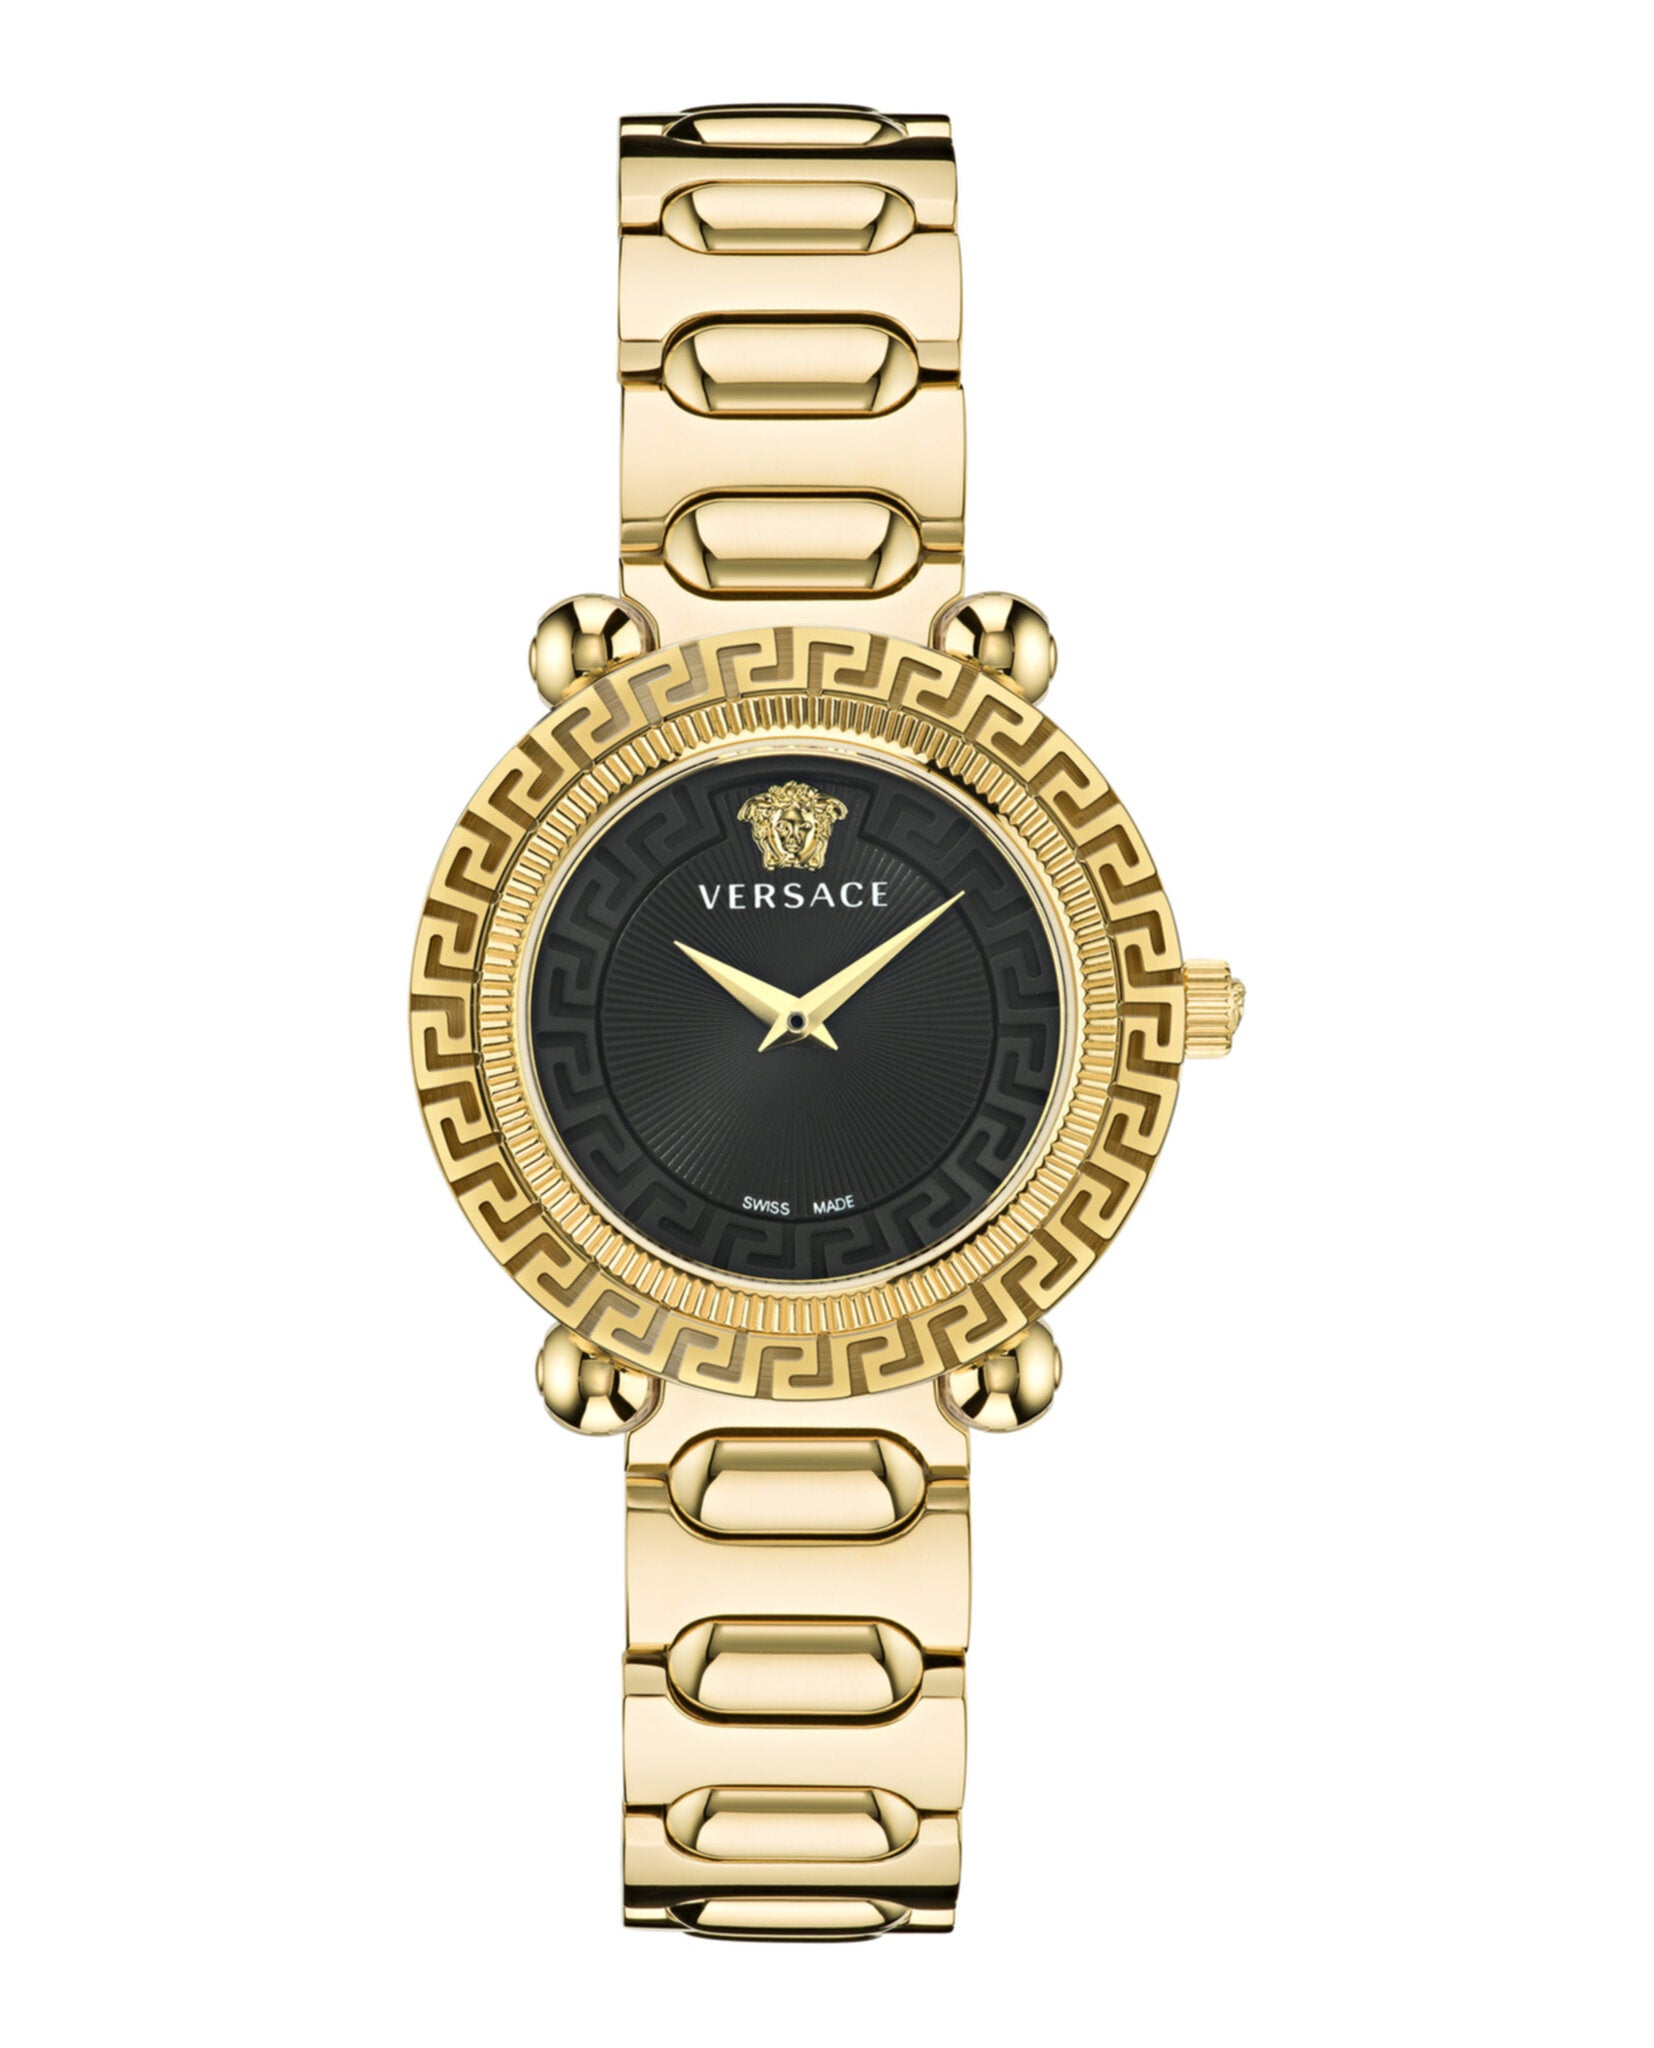 Versace Womens Greca Twist Watches | MadaLuxe Time – Madaluxe Time